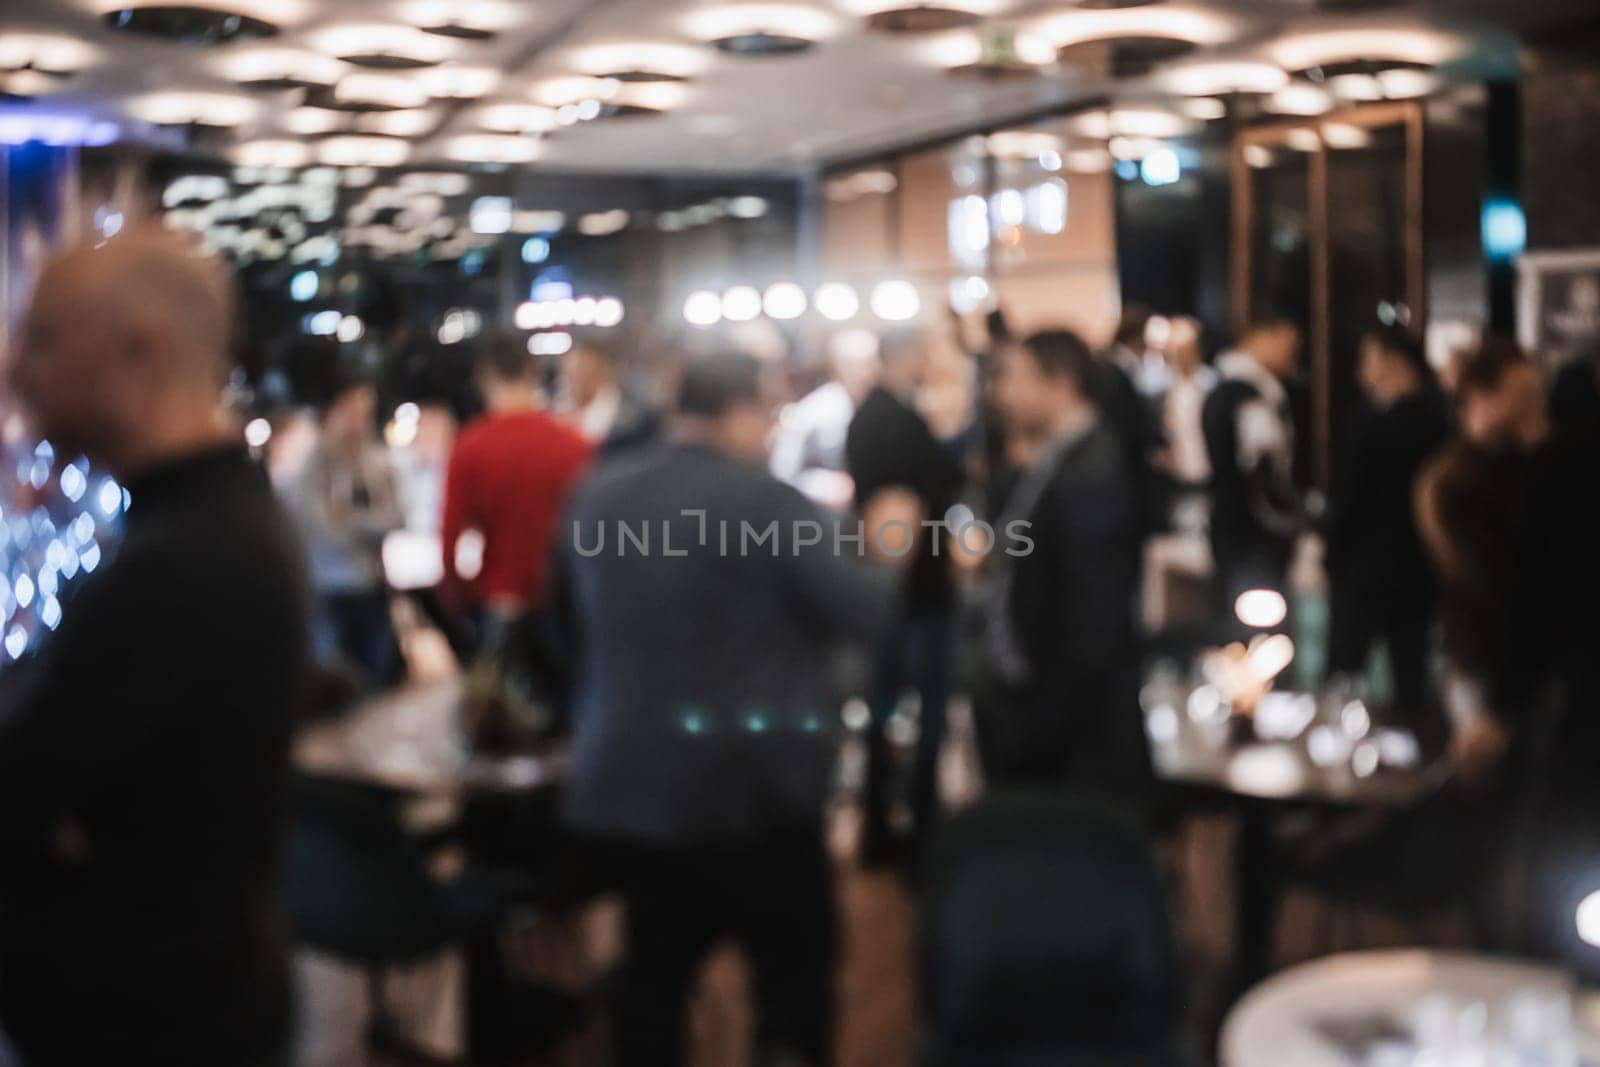 Blurred image of businesspeople at banquet event business meeting event. Business and entrepreneurship events concept.